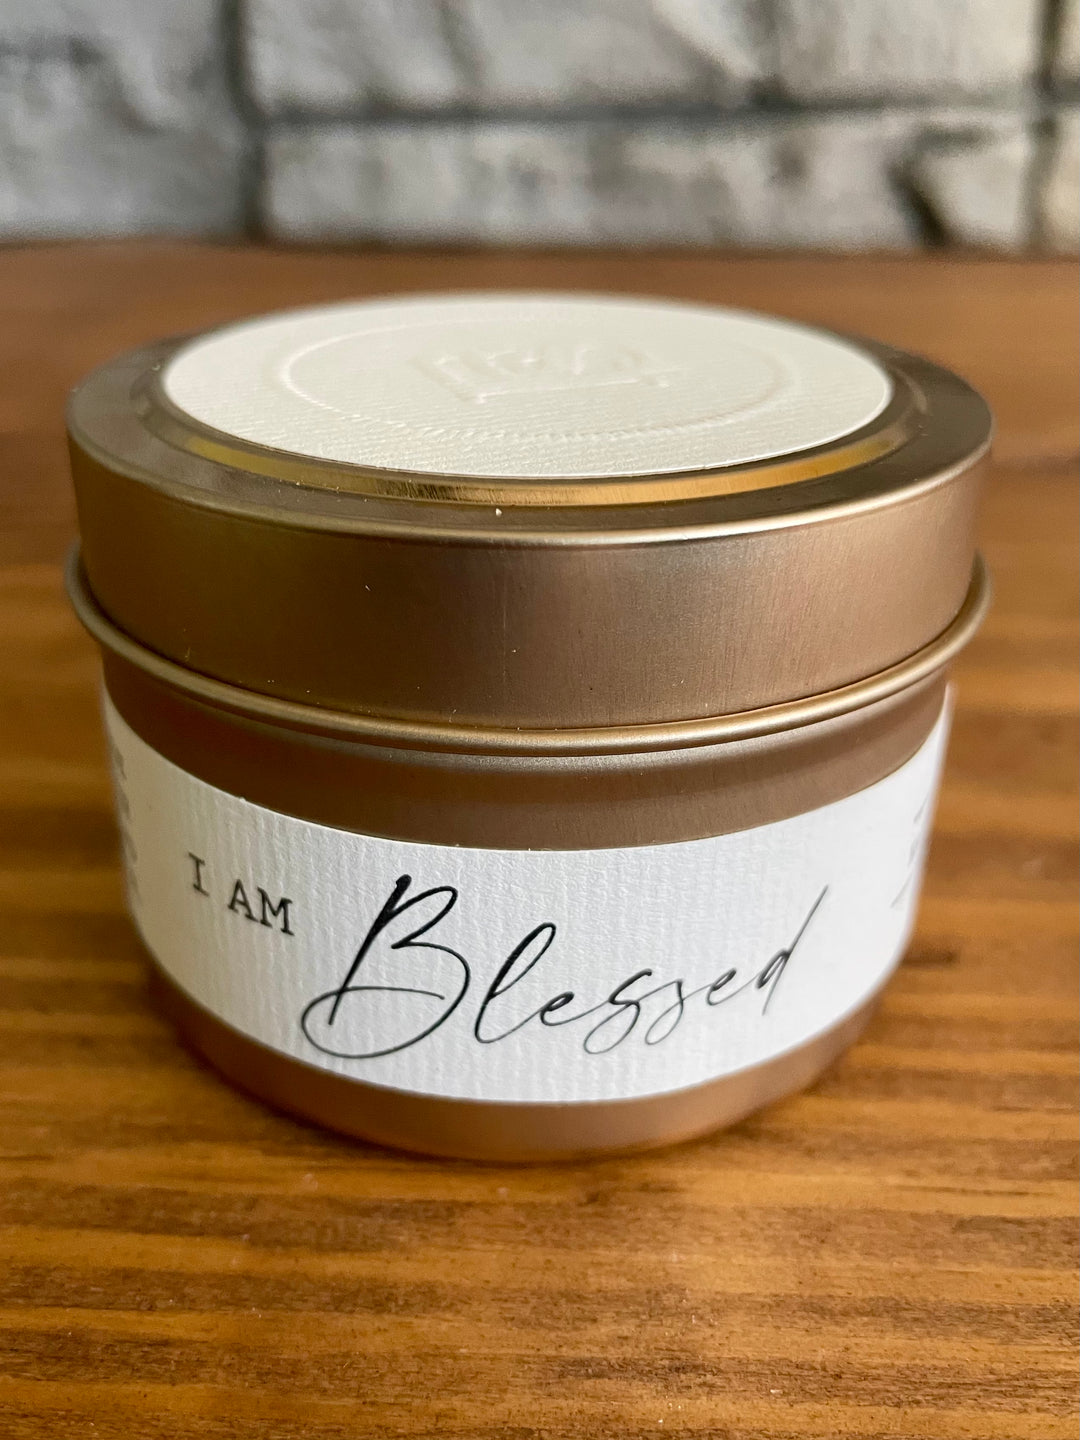 I am blessed soy candle, fair trade